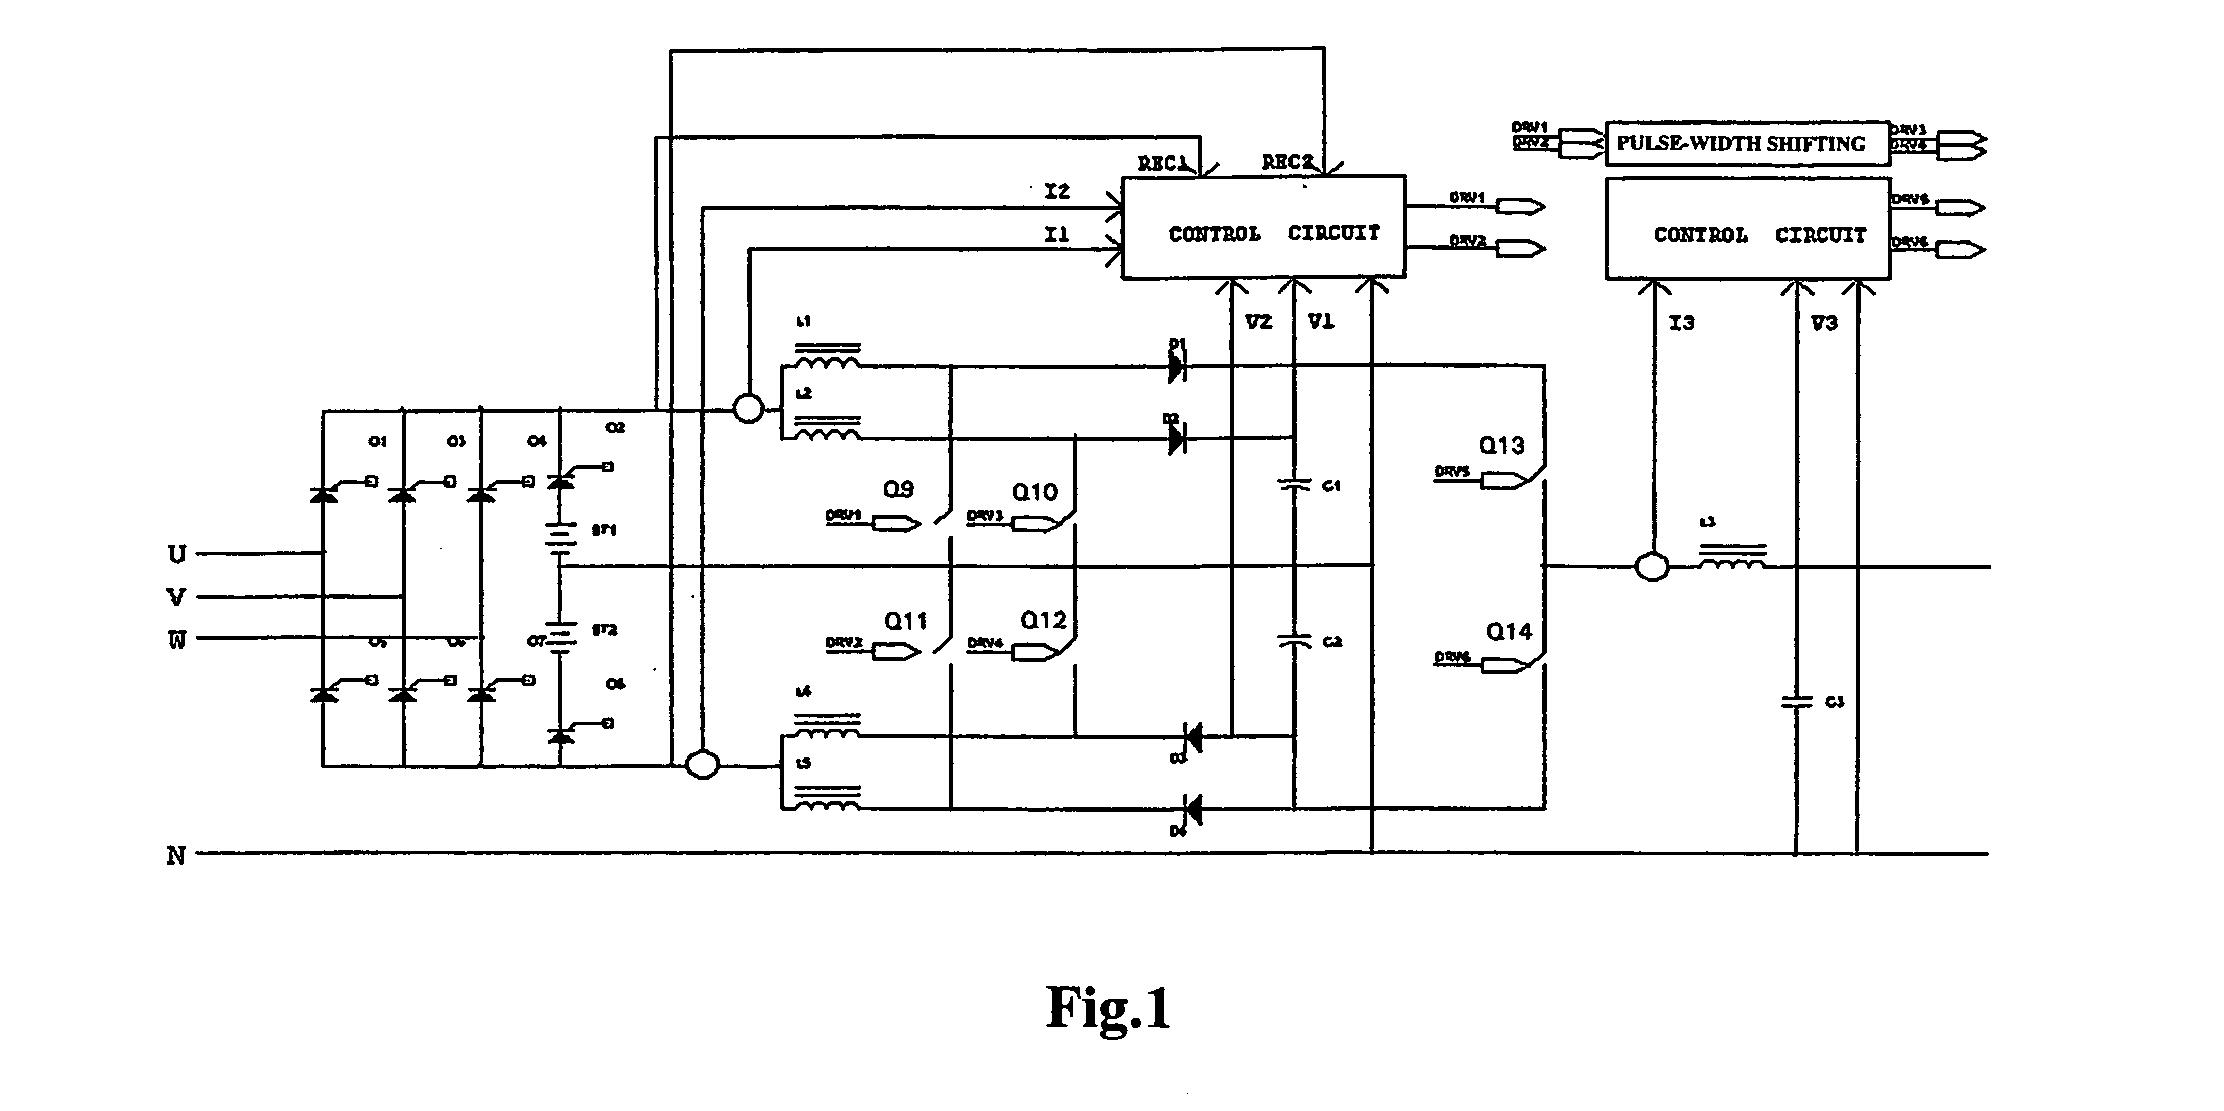 Uninterrupted power supply and the method for driving its converters